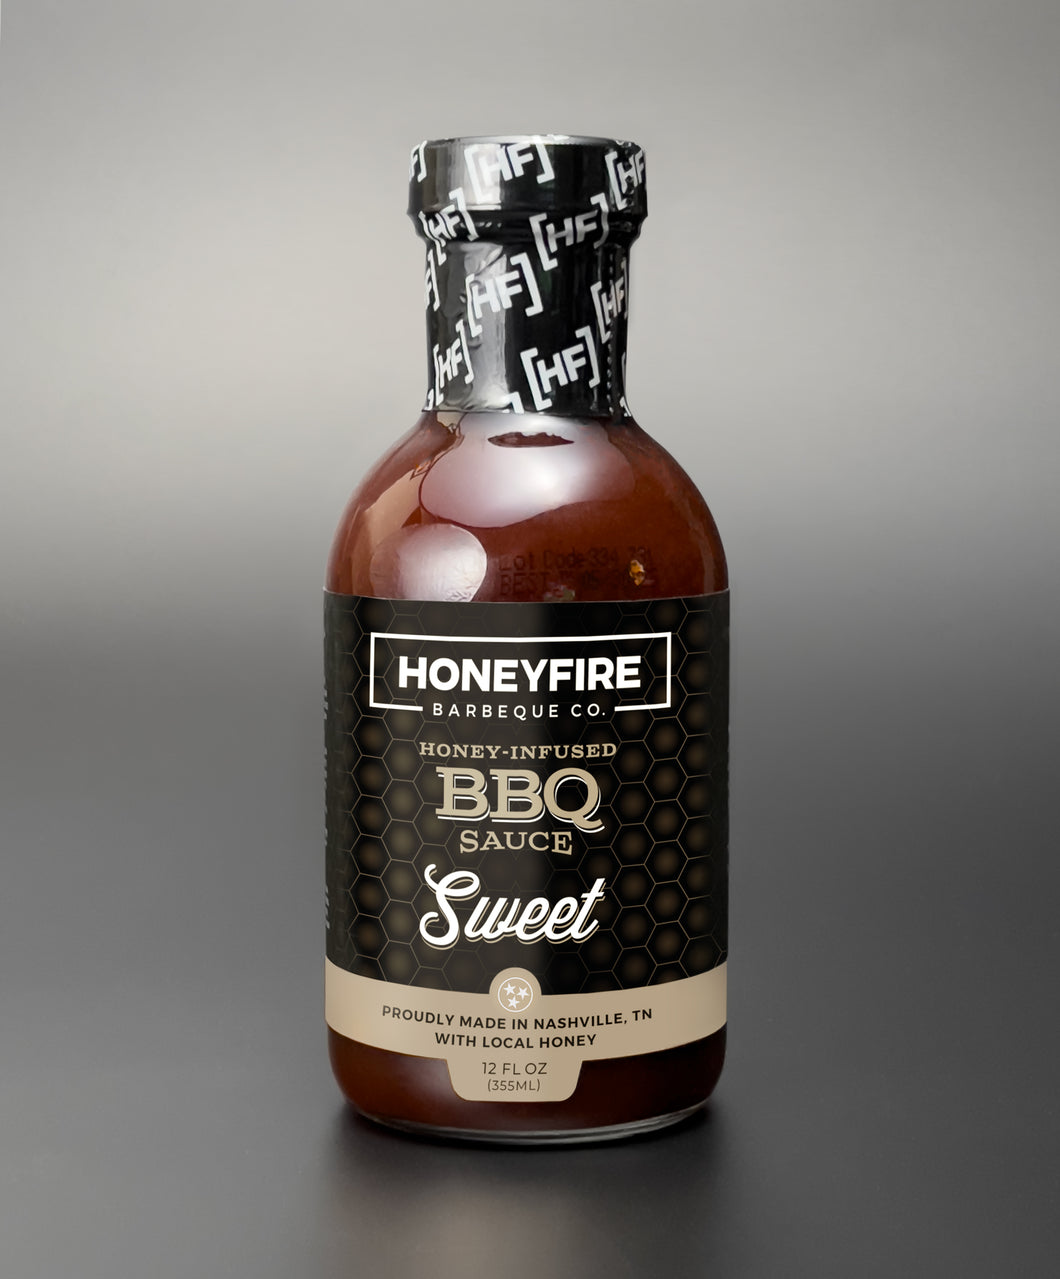 HoneyFire’s Sweet BBQ Sauce is for those who love barbecue but also have a sweet tooth.